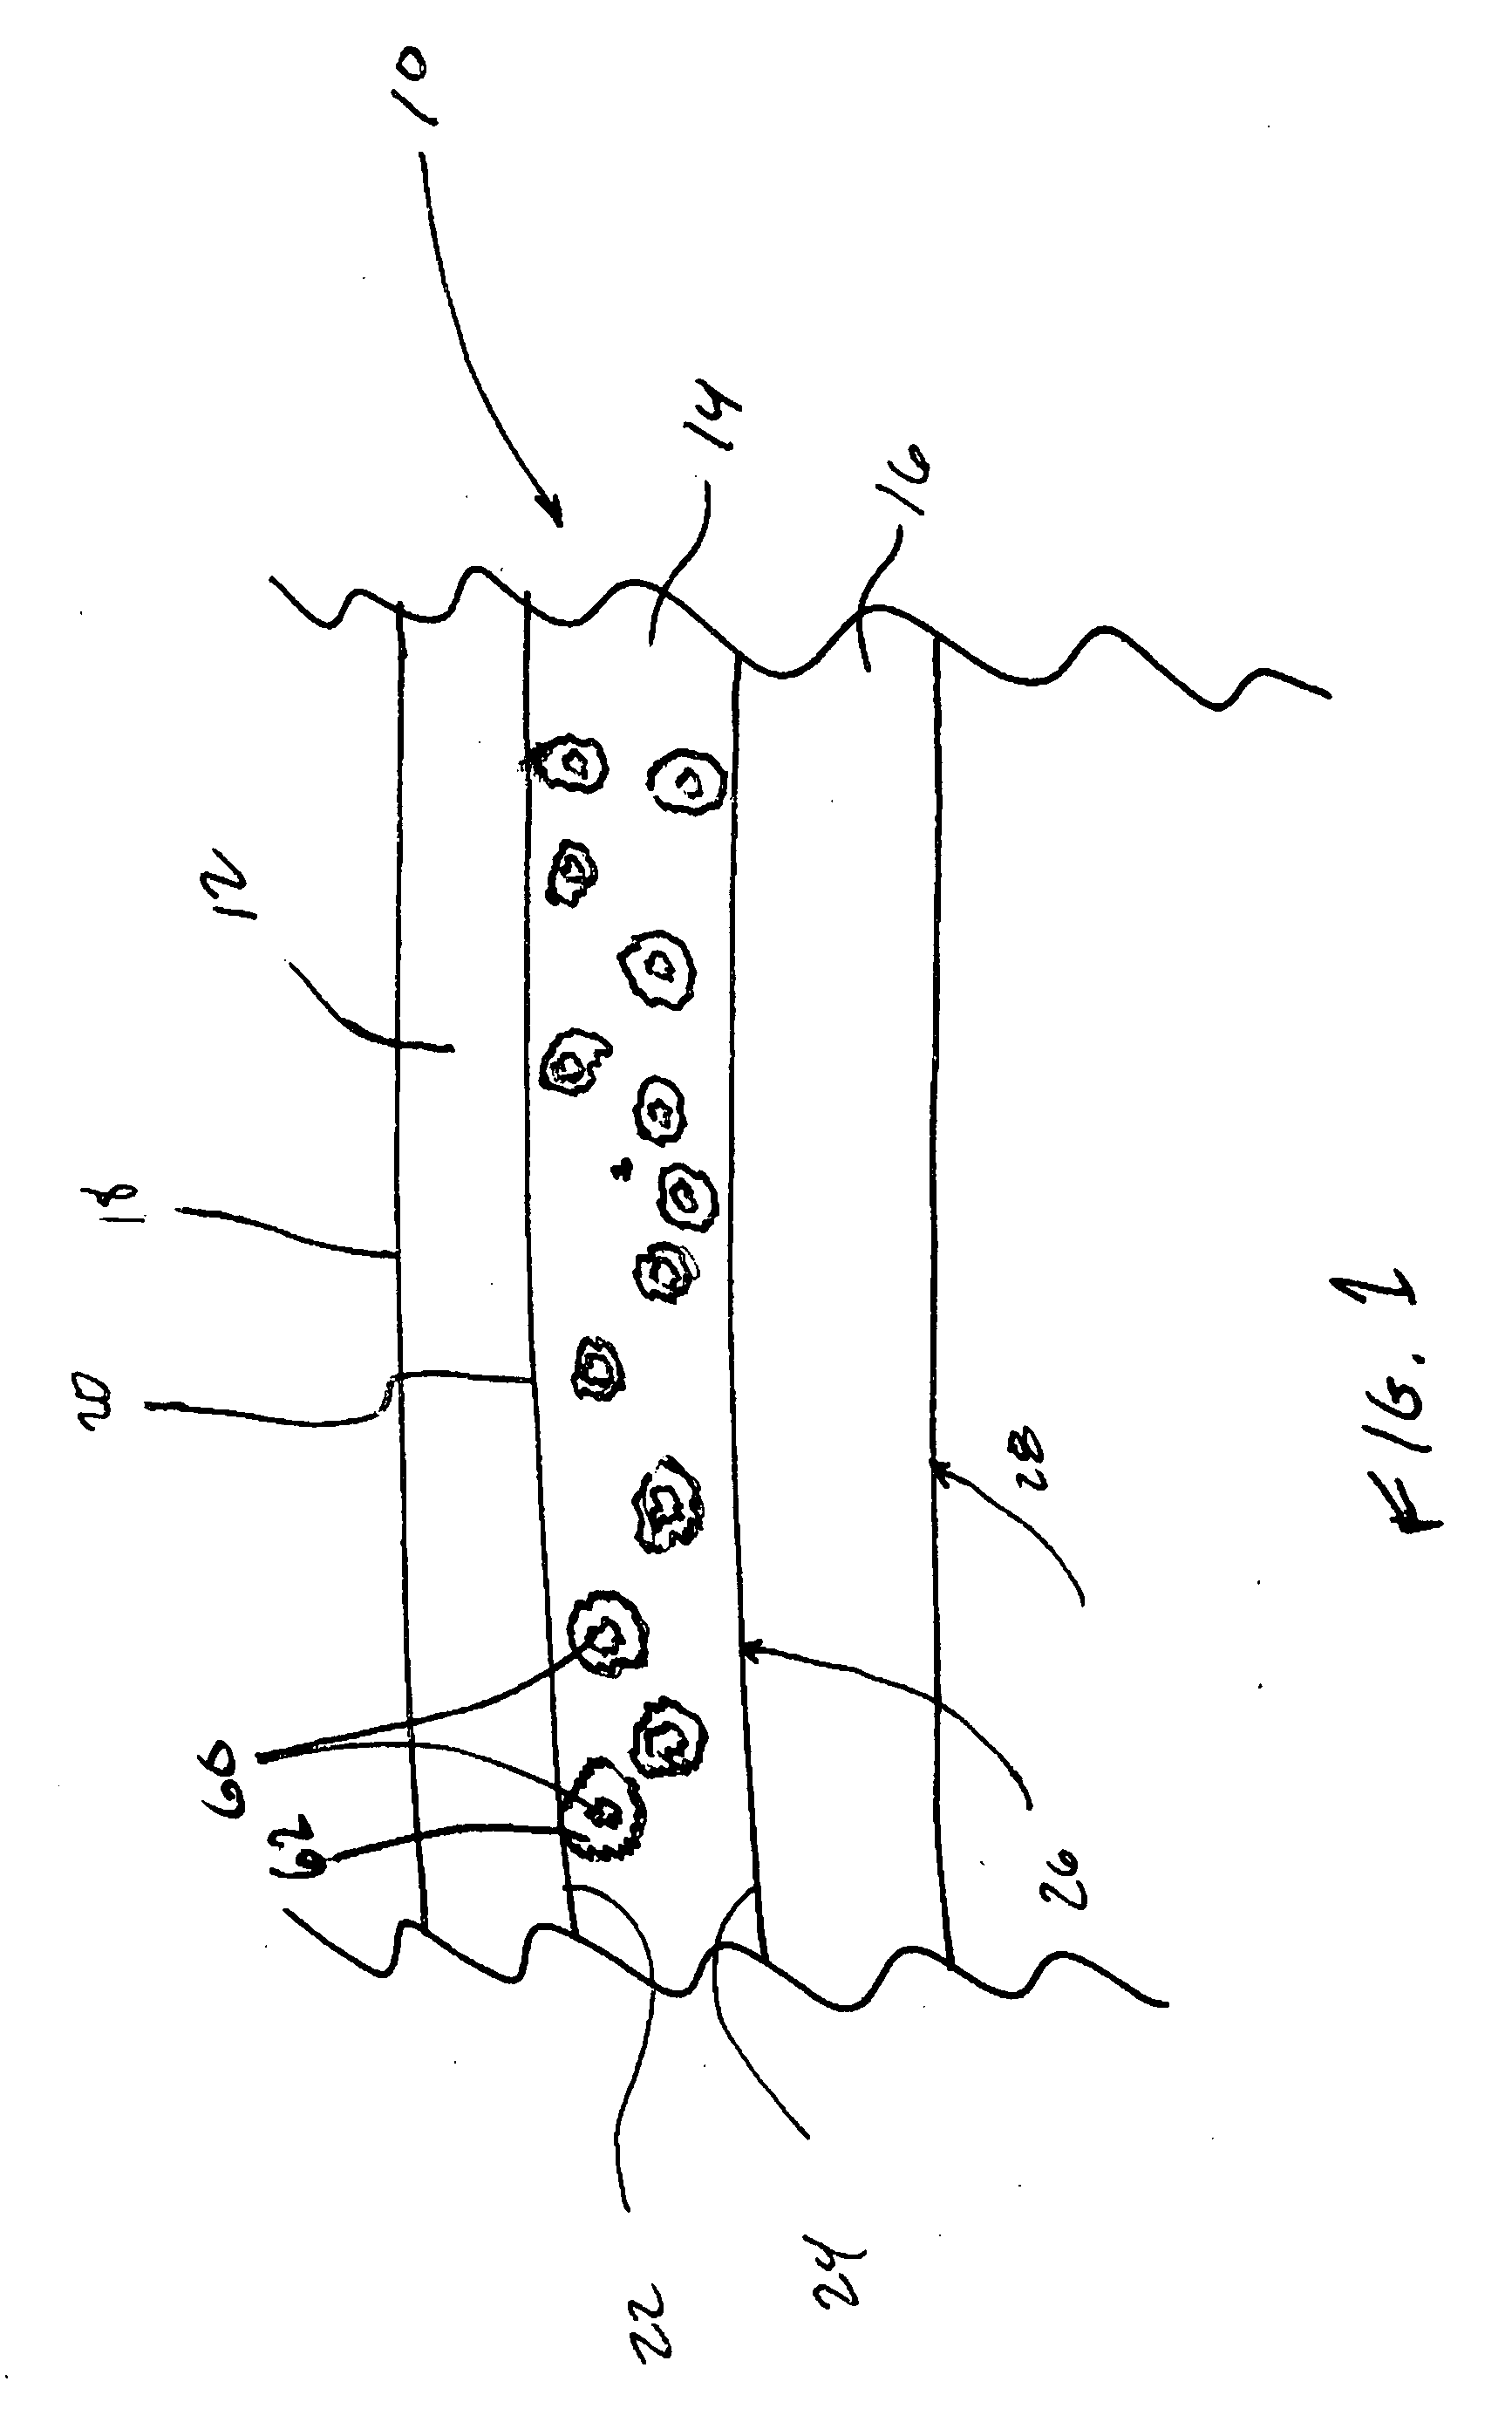 Articles, operating room drapes and methods of making and using the same